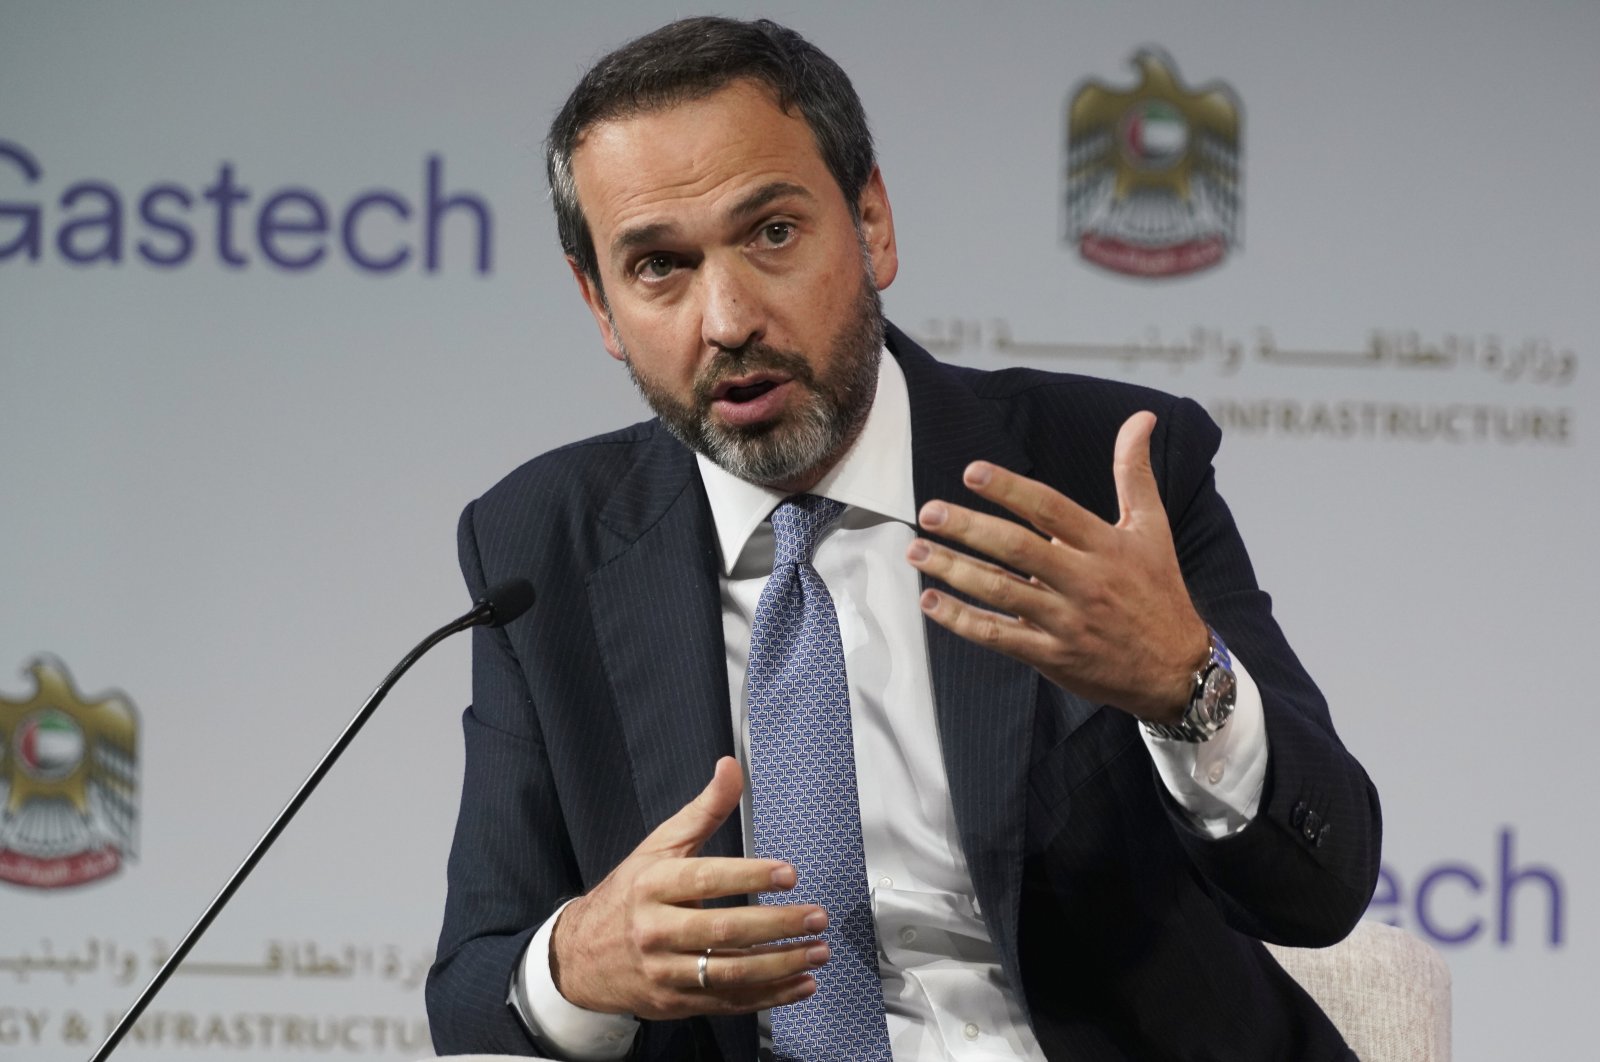 Turkey's Deputy Energy and Natural Resources Minister Alparslan Bayraktar gestures during a discussion on stage at the Gastech 2021 conference in Dubai, United Arab Emirates, Sept. 21, 2021. (AP Photo)